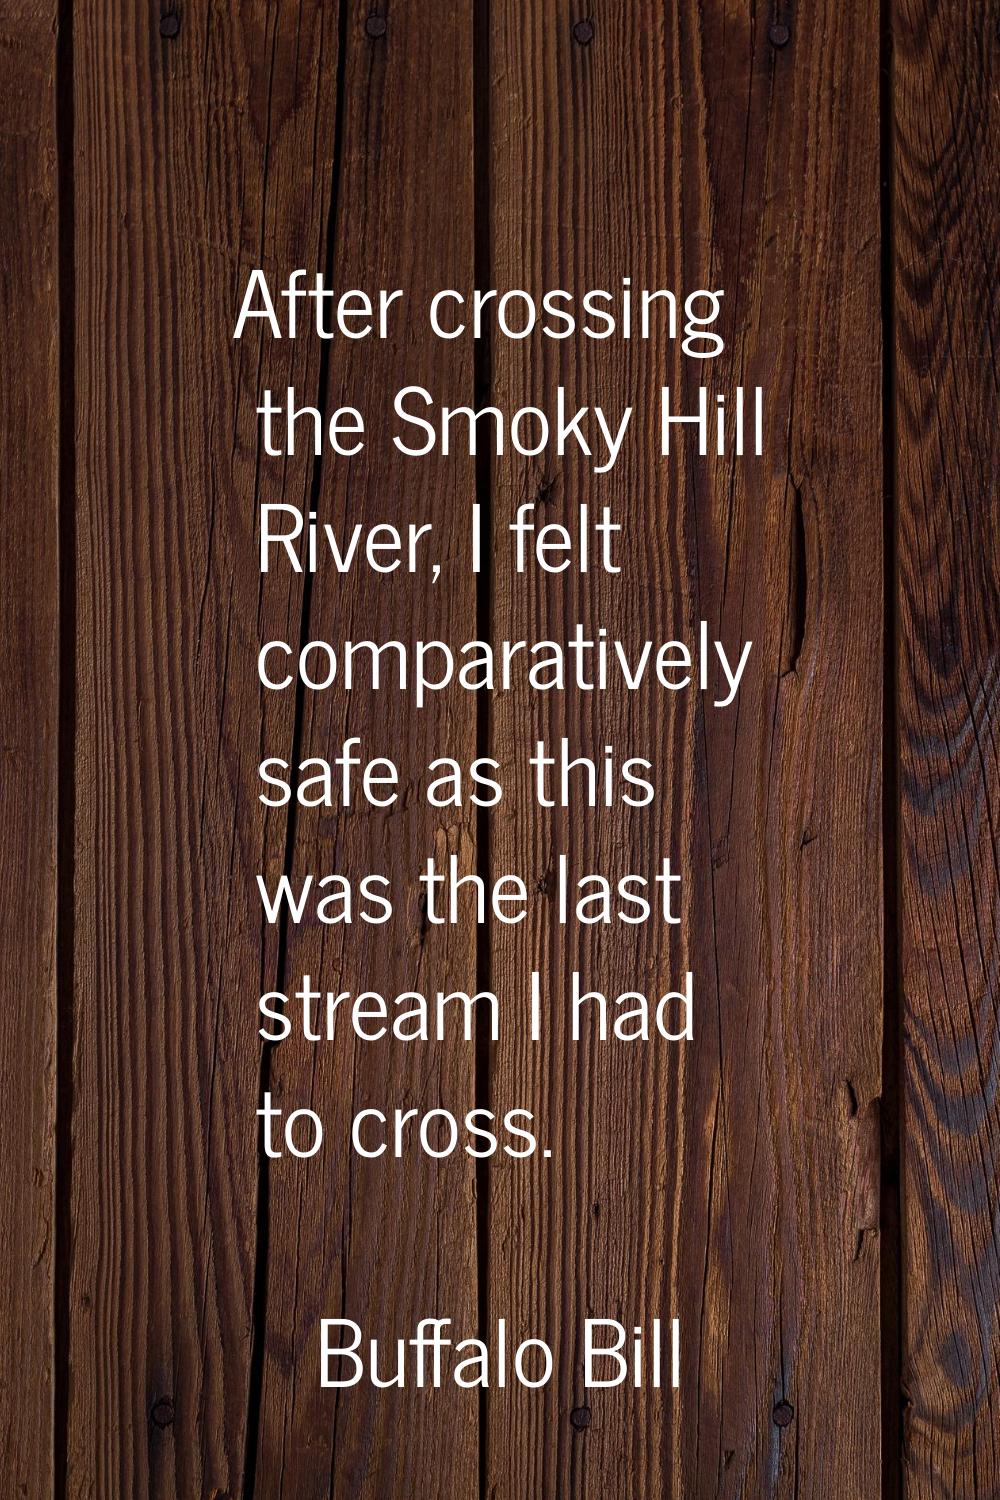 After crossing the Smoky Hill River, I felt comparatively safe as this was the last stream I had to